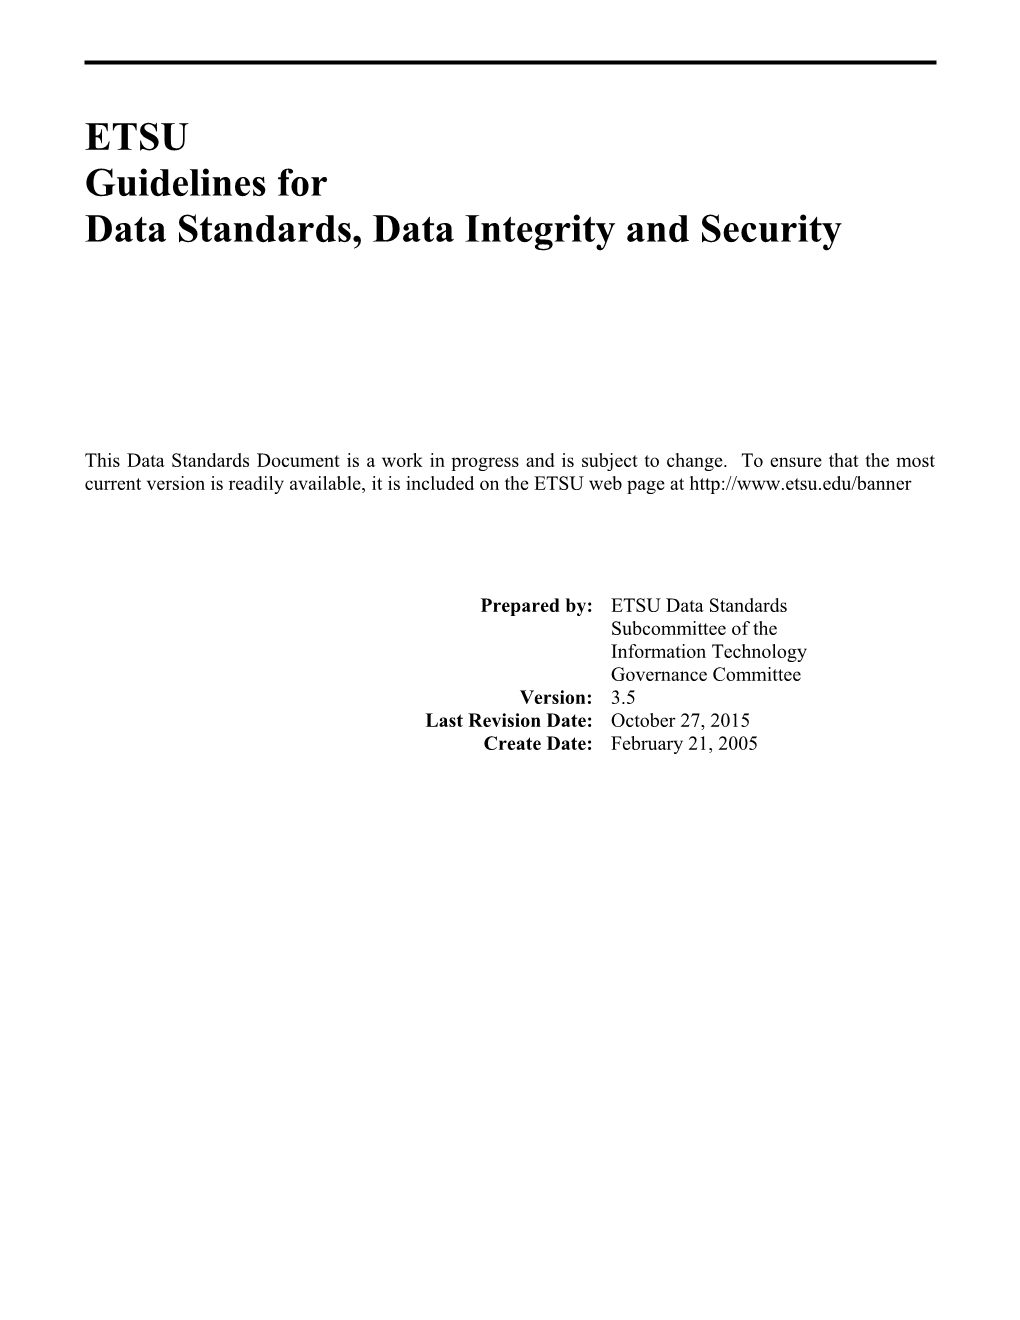 Data Standards, Data Integrity and Security